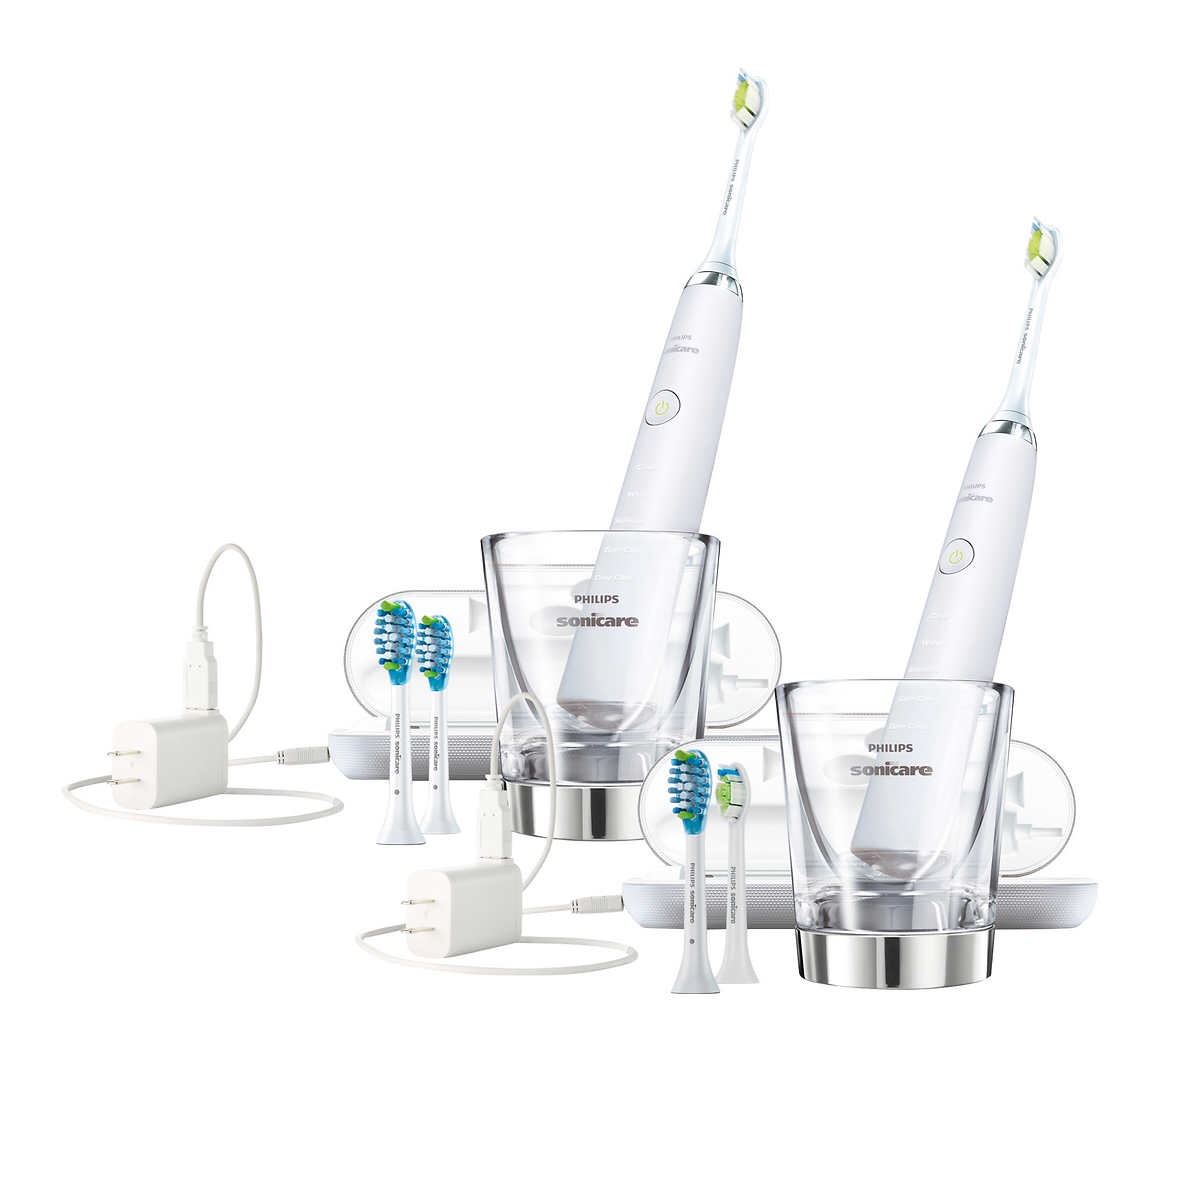 Philips Sonicare DiamondClean Rechargeable Electric Toothbrush 2-handle Pack, White